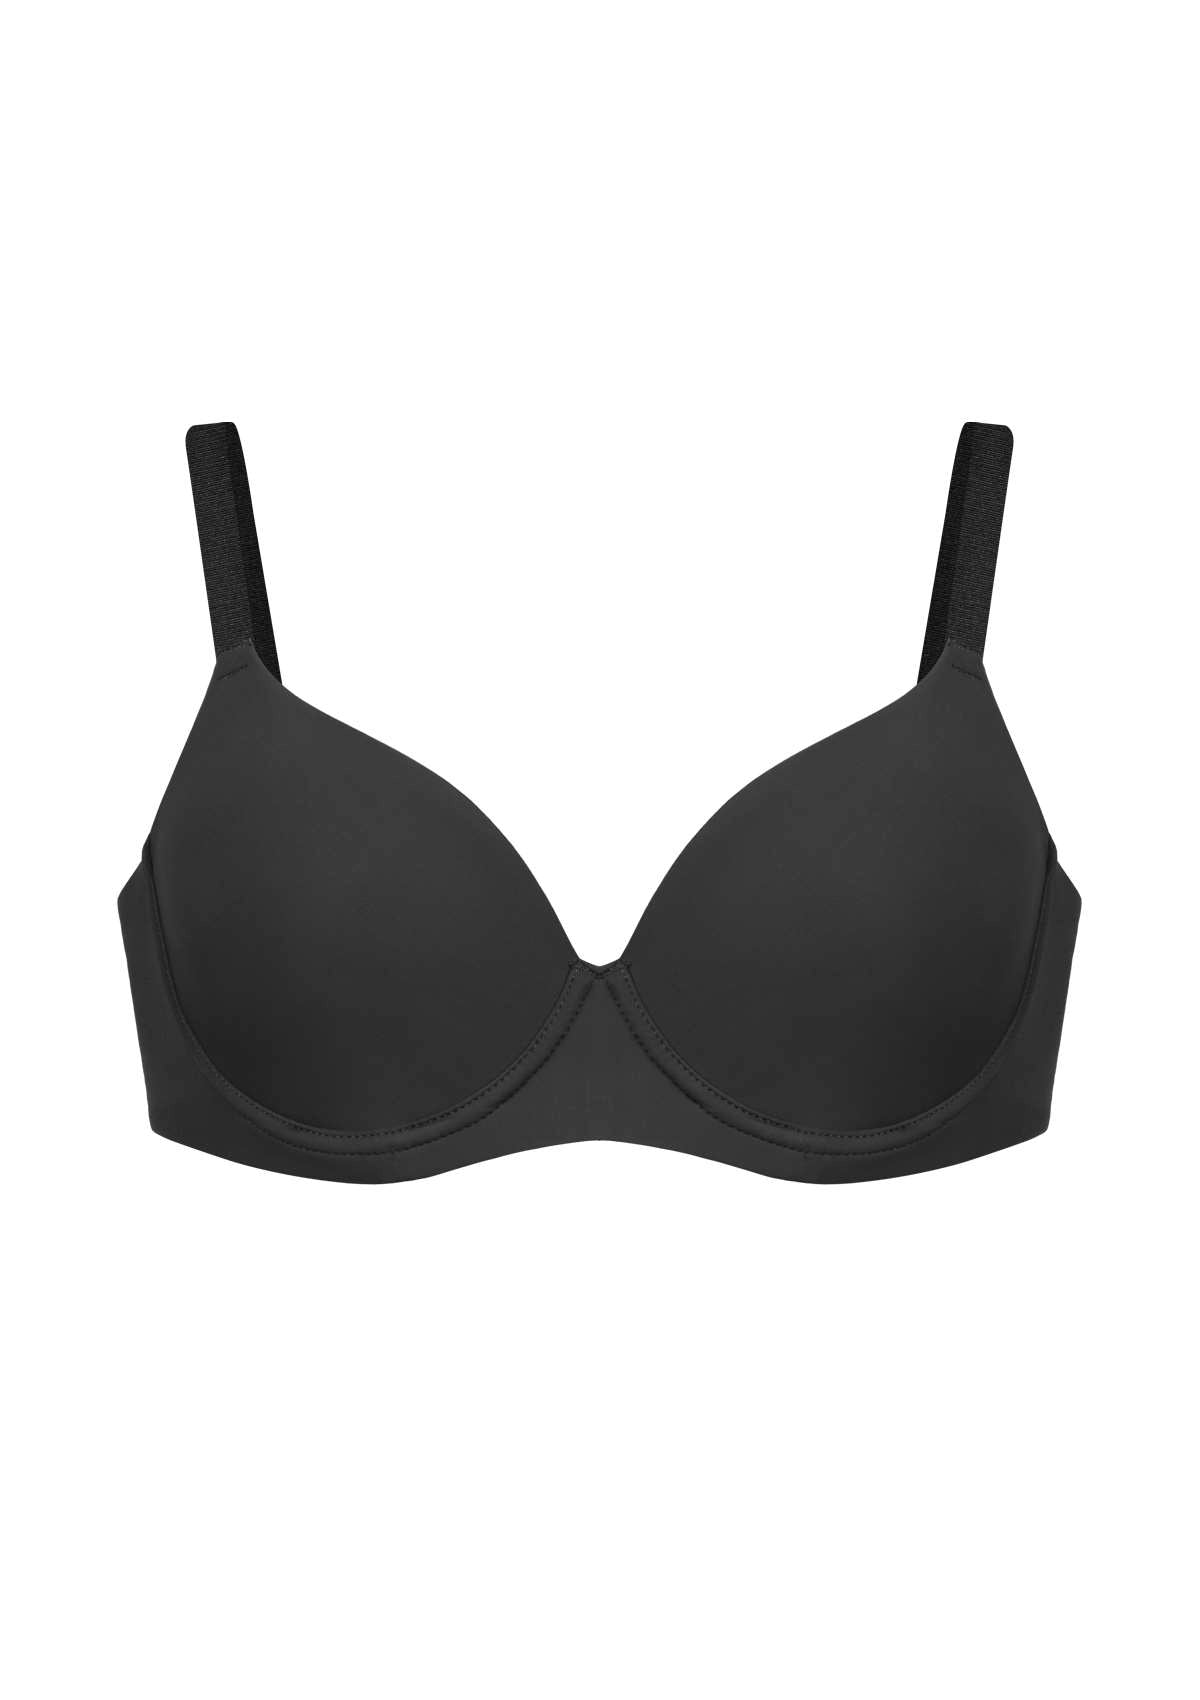 HSIA Gemma Smooth Padded T-shirt Everyday Bras - For Lift And Comfort - Black / 36 / D